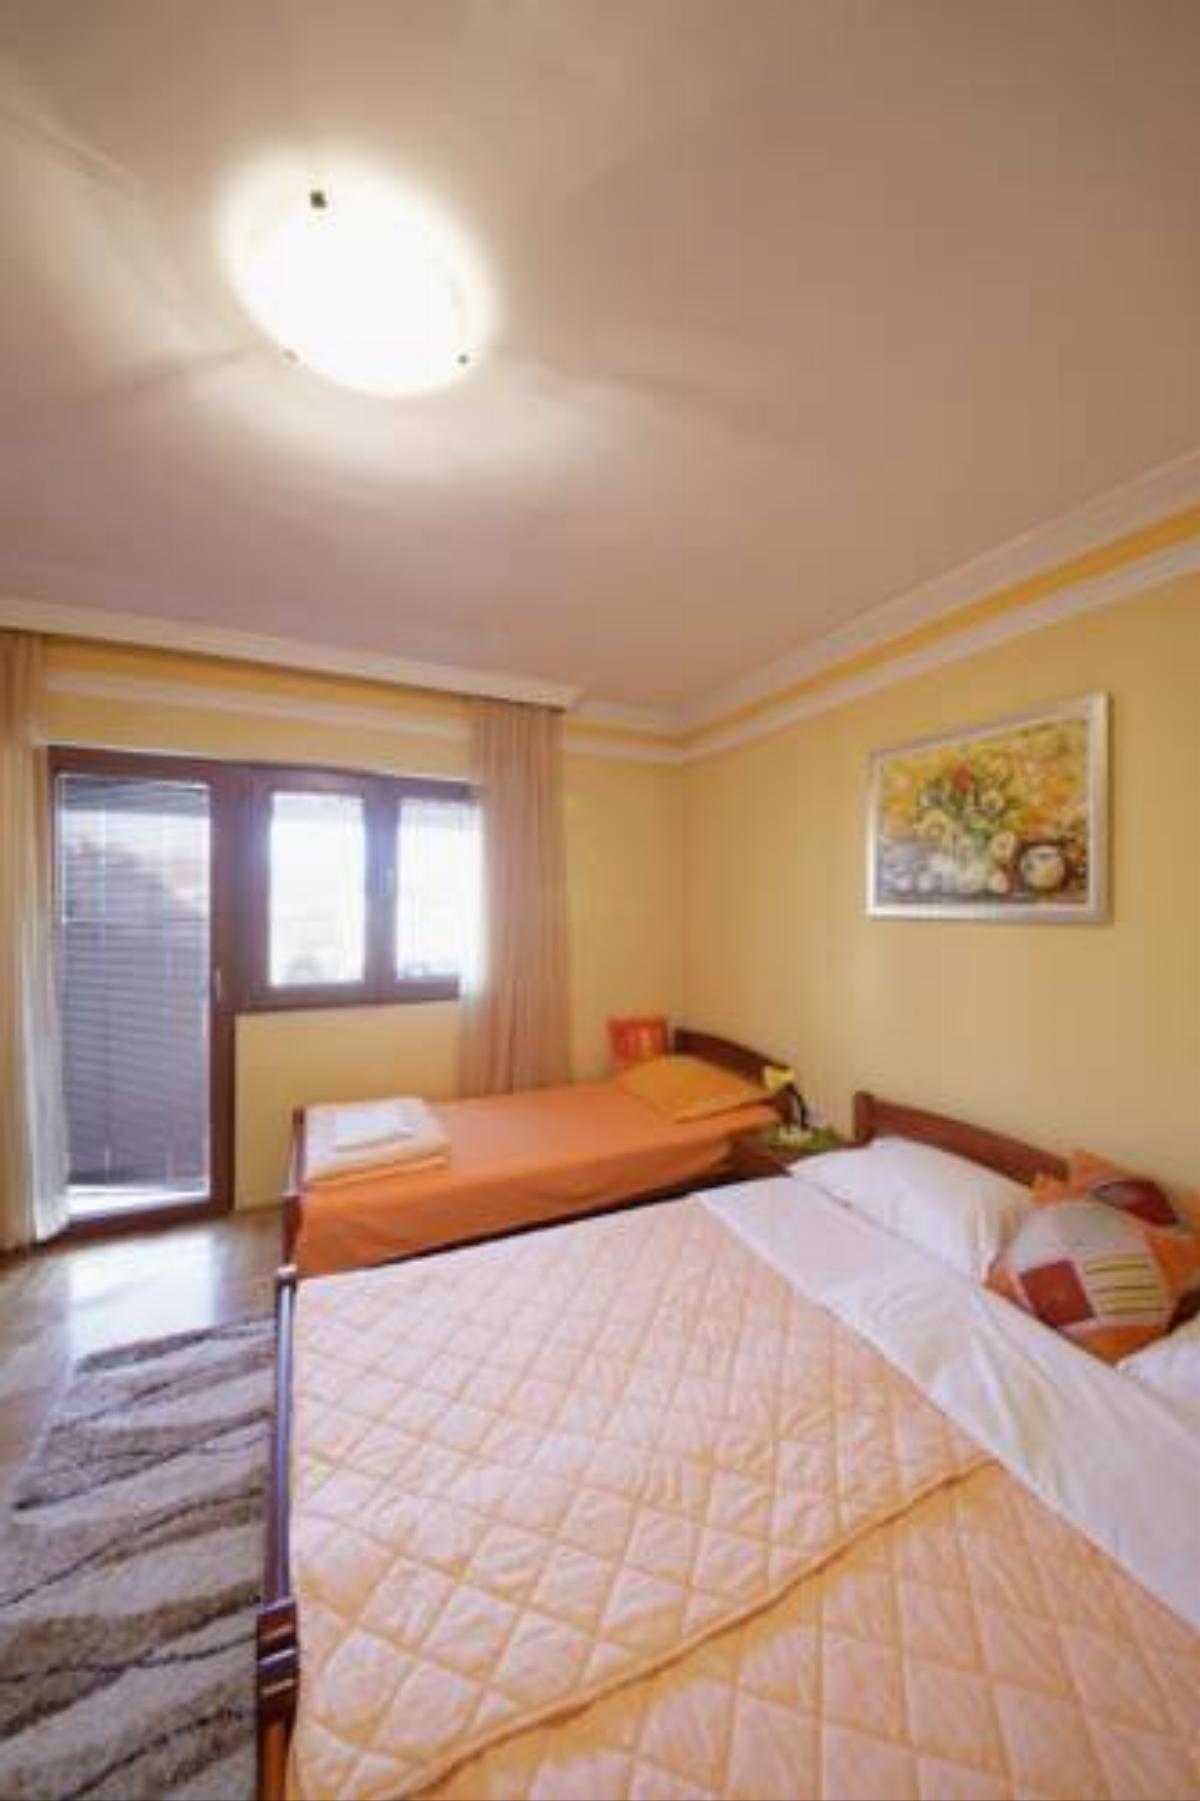 Guest House Pansion 10 Hotel Cetinje Montenegro